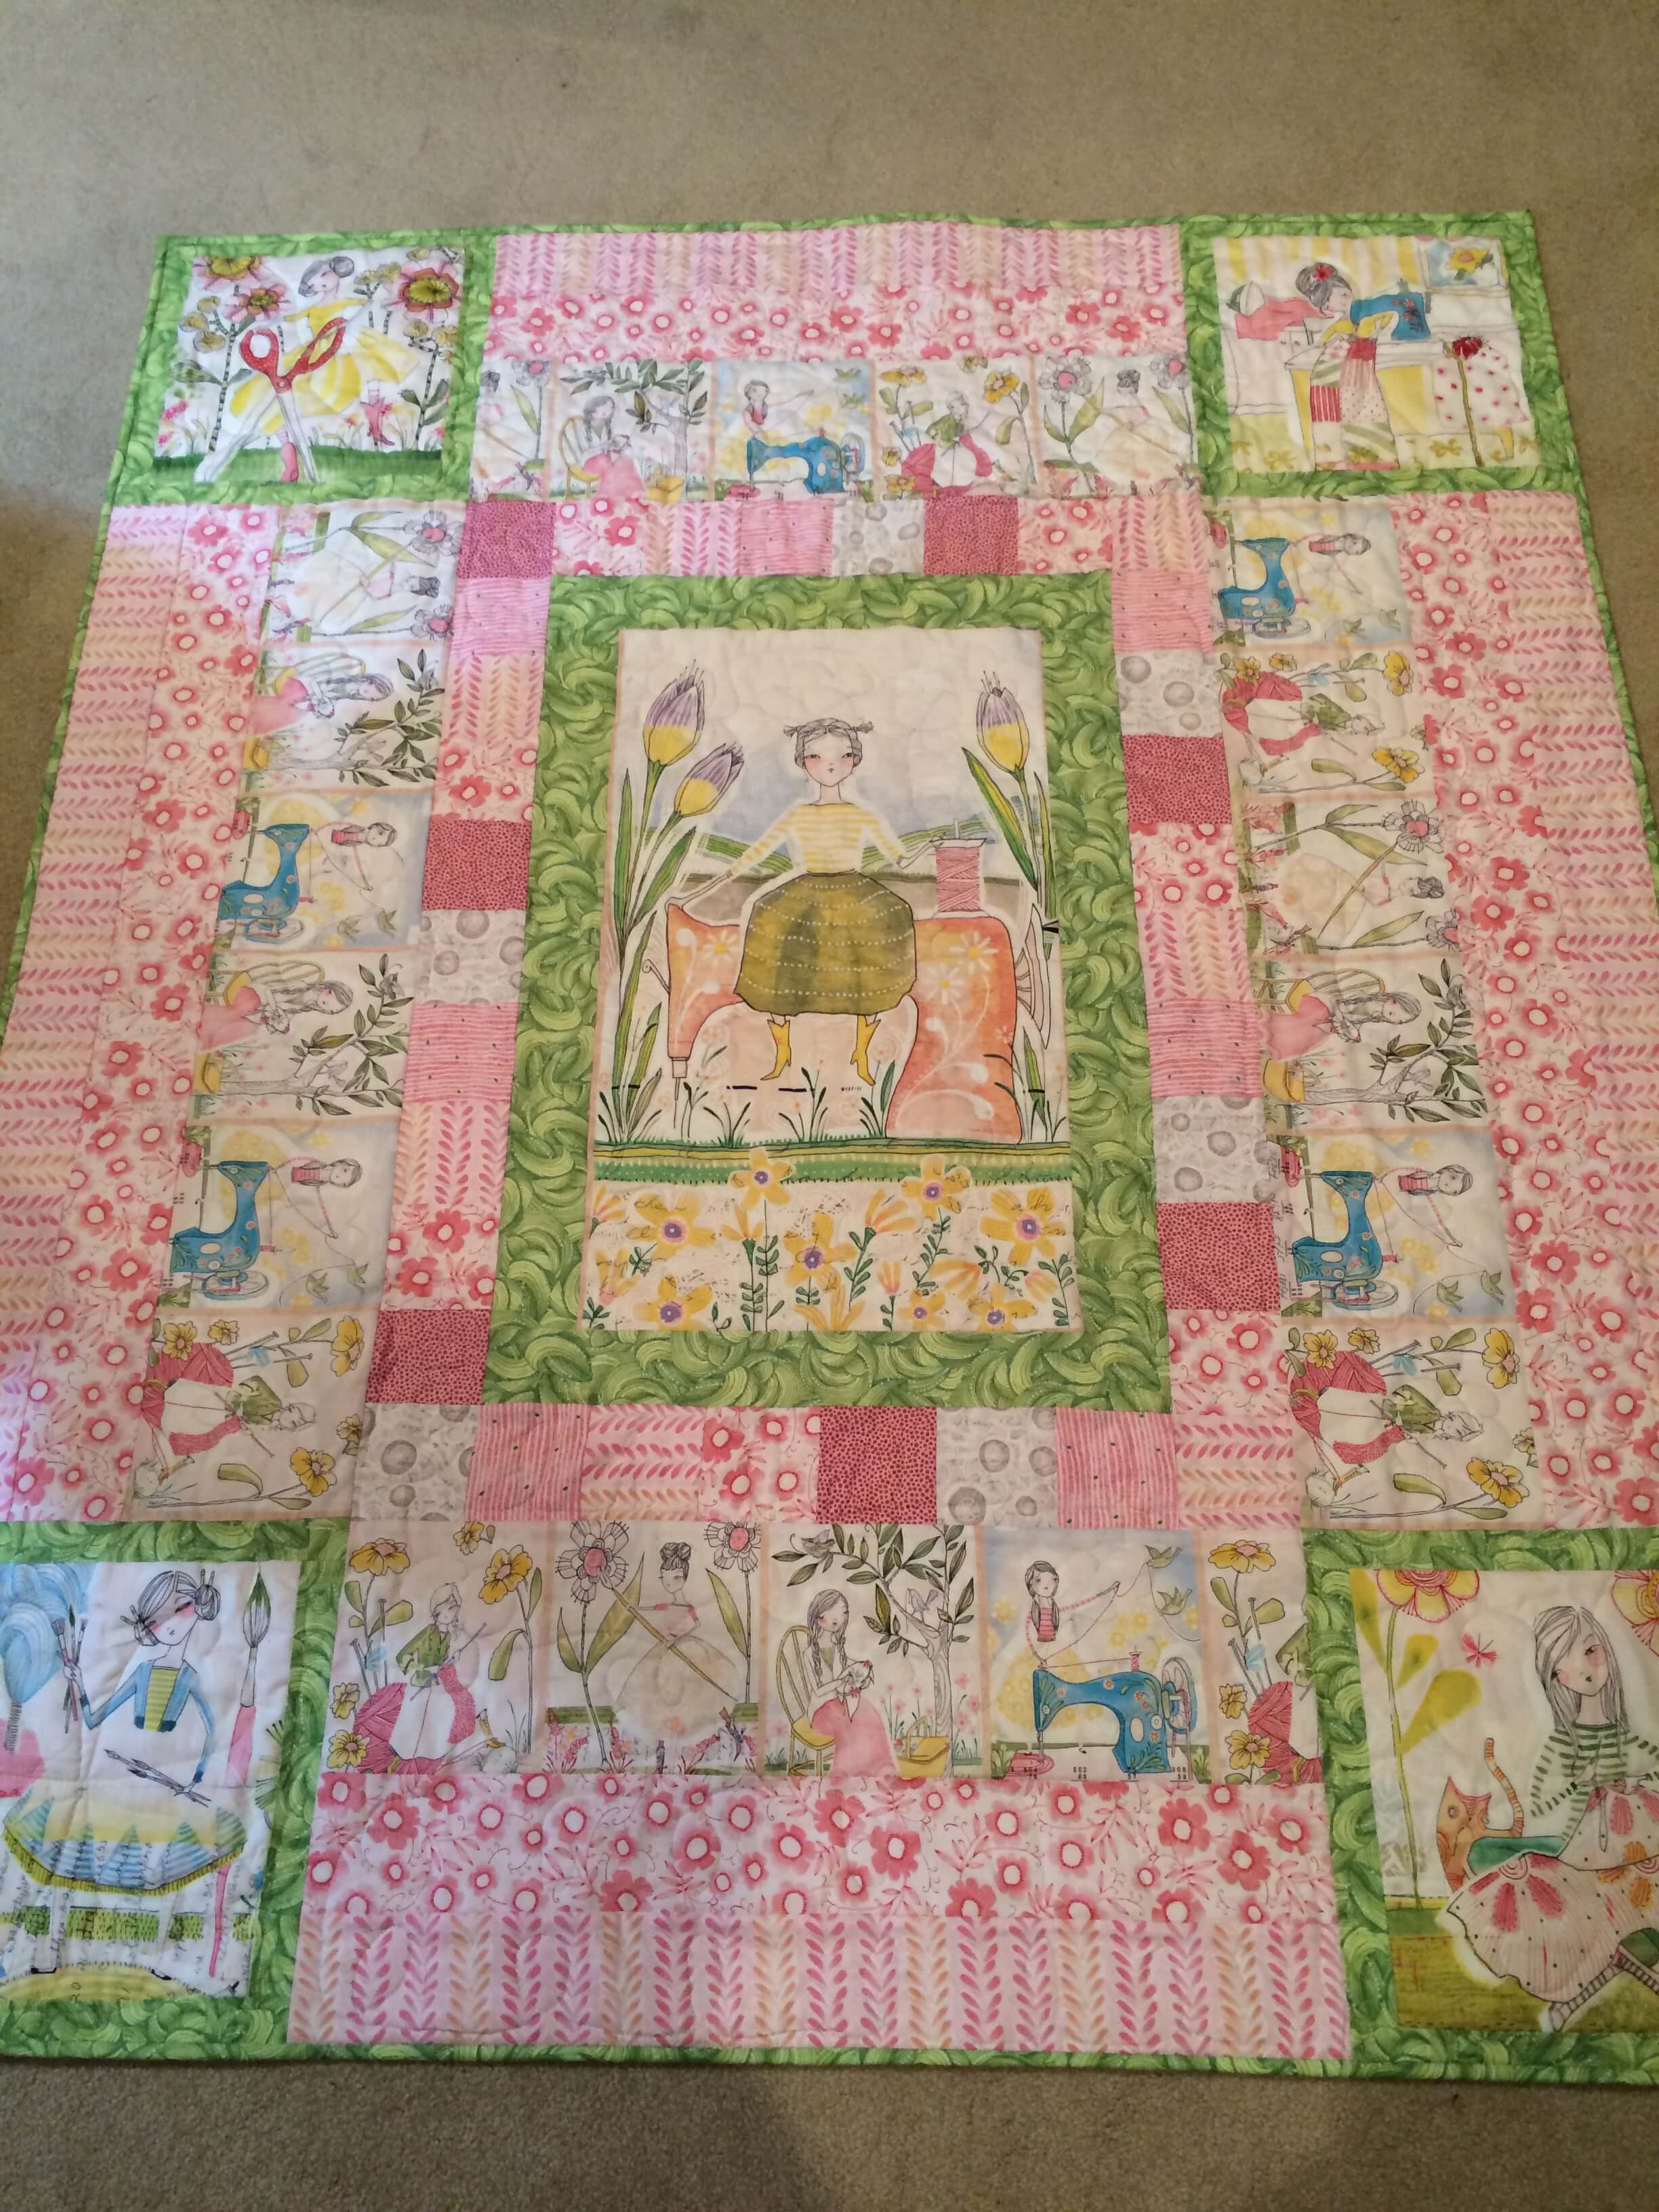 Happy Place Quilt made by @scissortailquilting